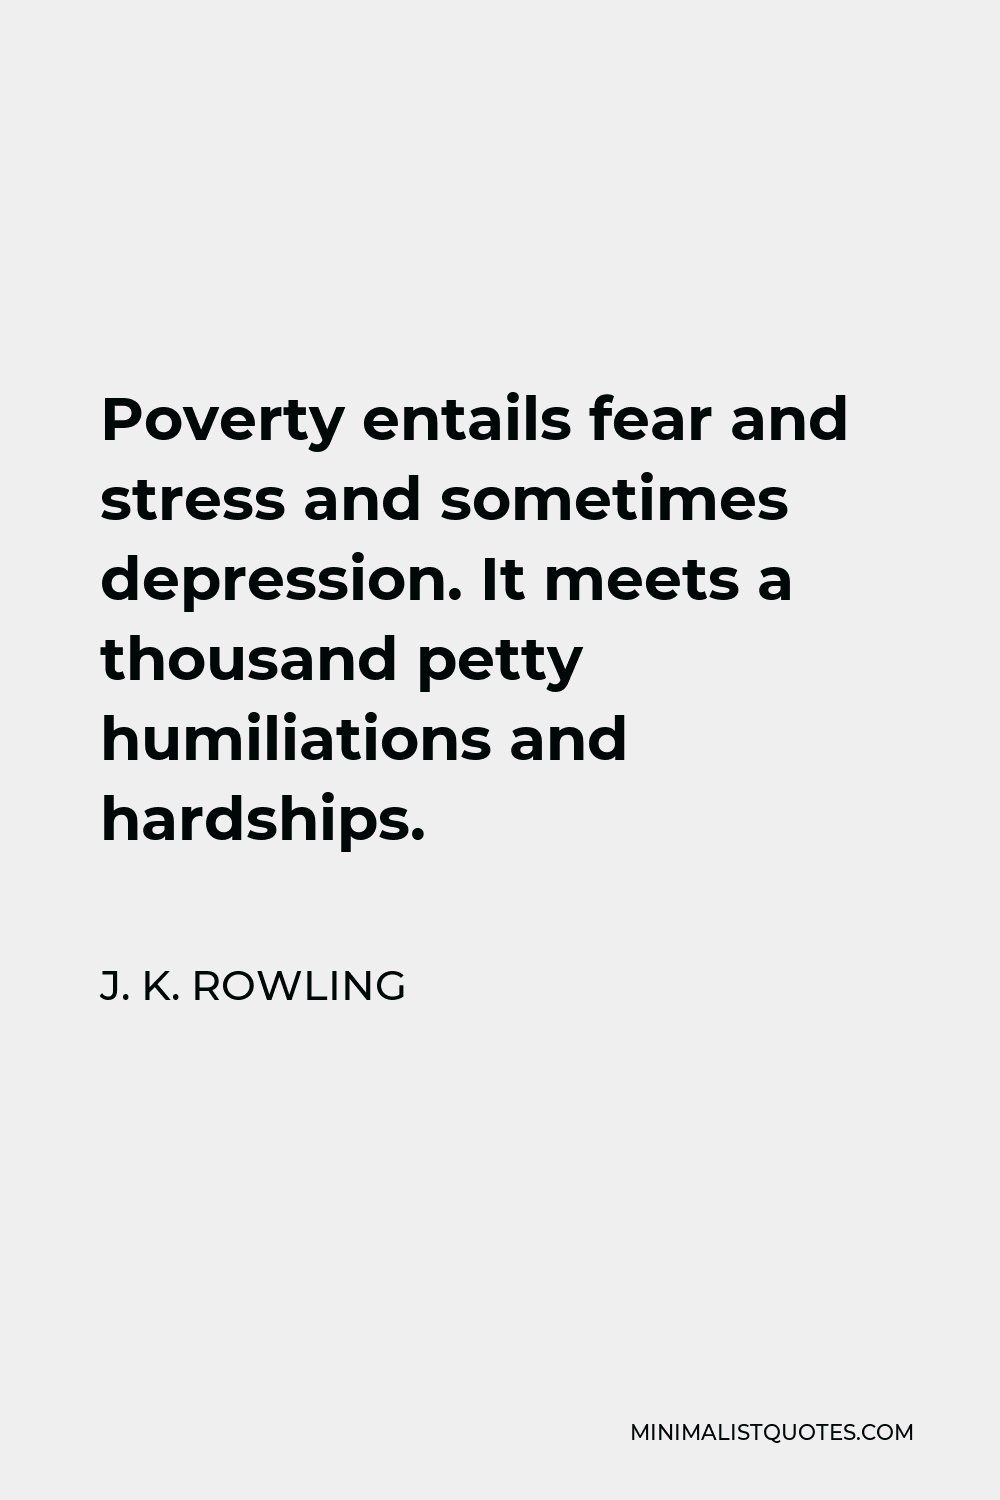 J. K. Rowling Quote - Poverty entails fear and stress and sometimes depression. It meets a thousand petty humiliations and hardships.